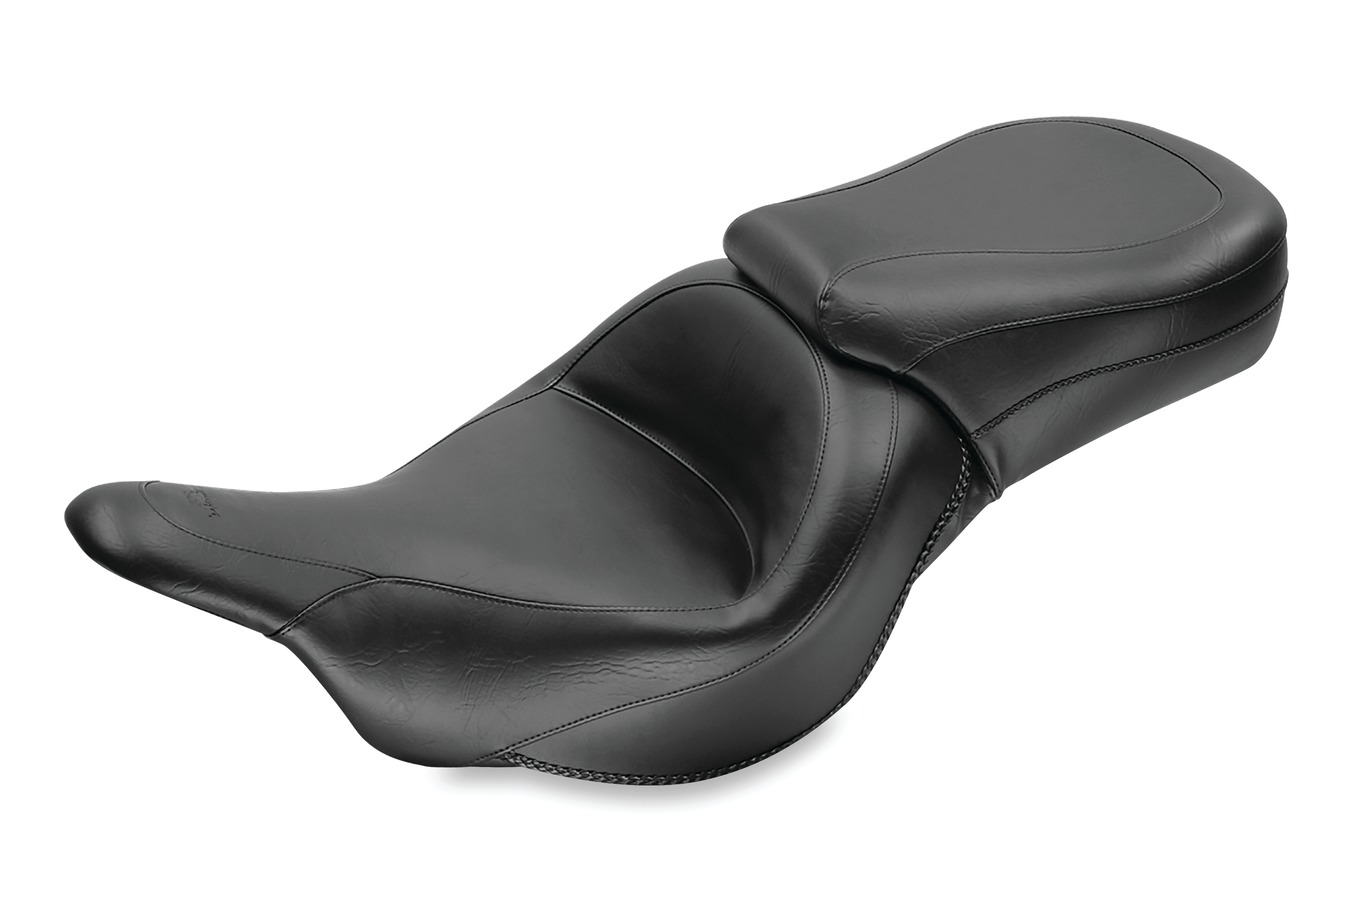 Standard Touring One-Piece Seat for Kawasaki Vulcan 1700 Voyager & Nomad 2009-